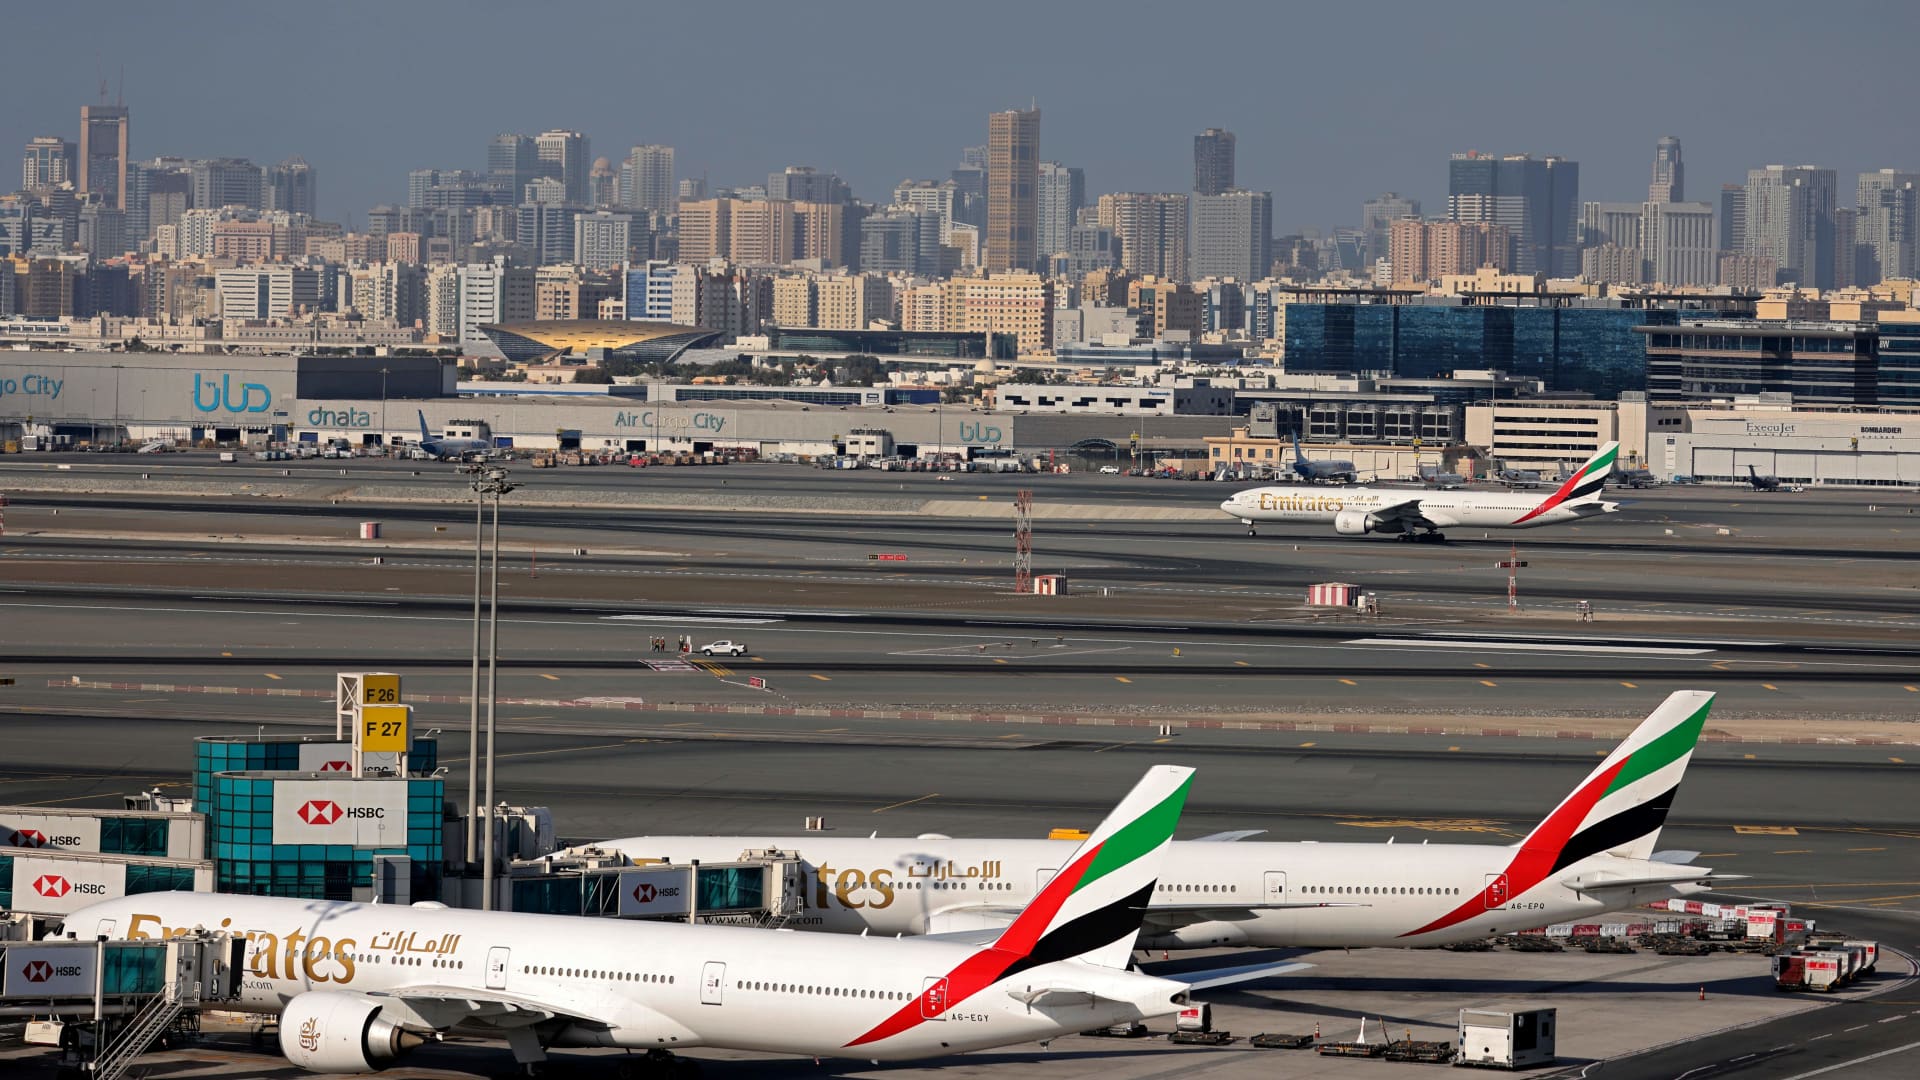 Emirates Airlines airplanes at Dubai International Airport on February 1, 2021.